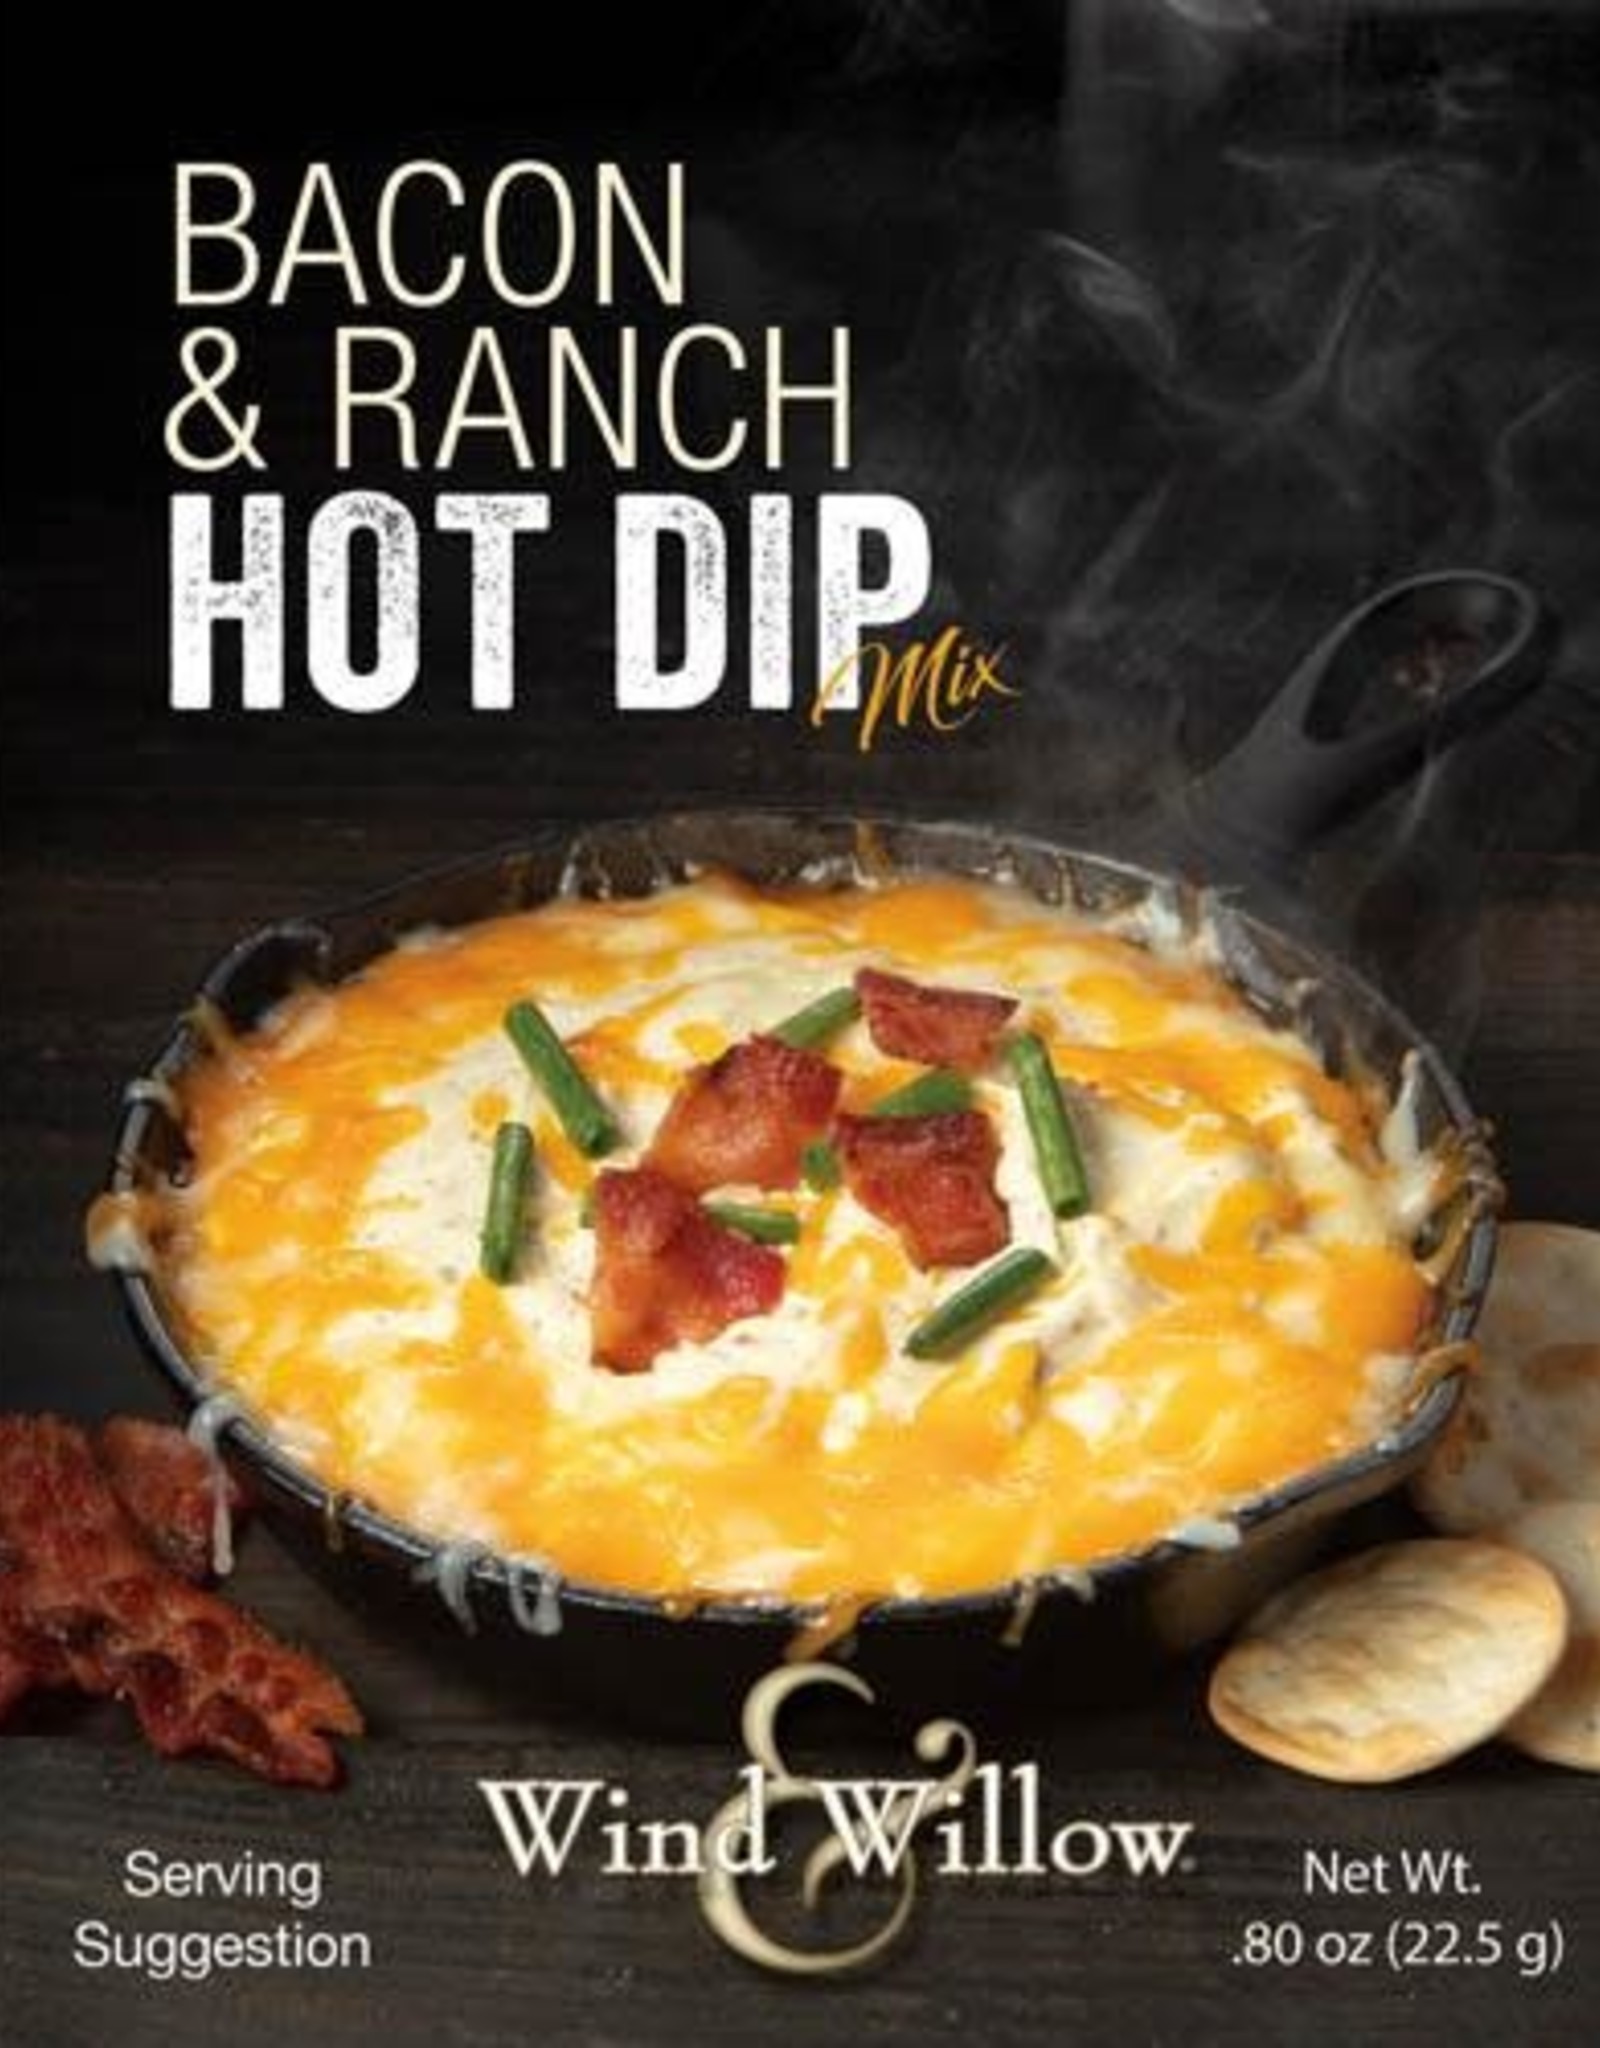 Wind & Willow Bacon & Ranch Hot Dip Mix